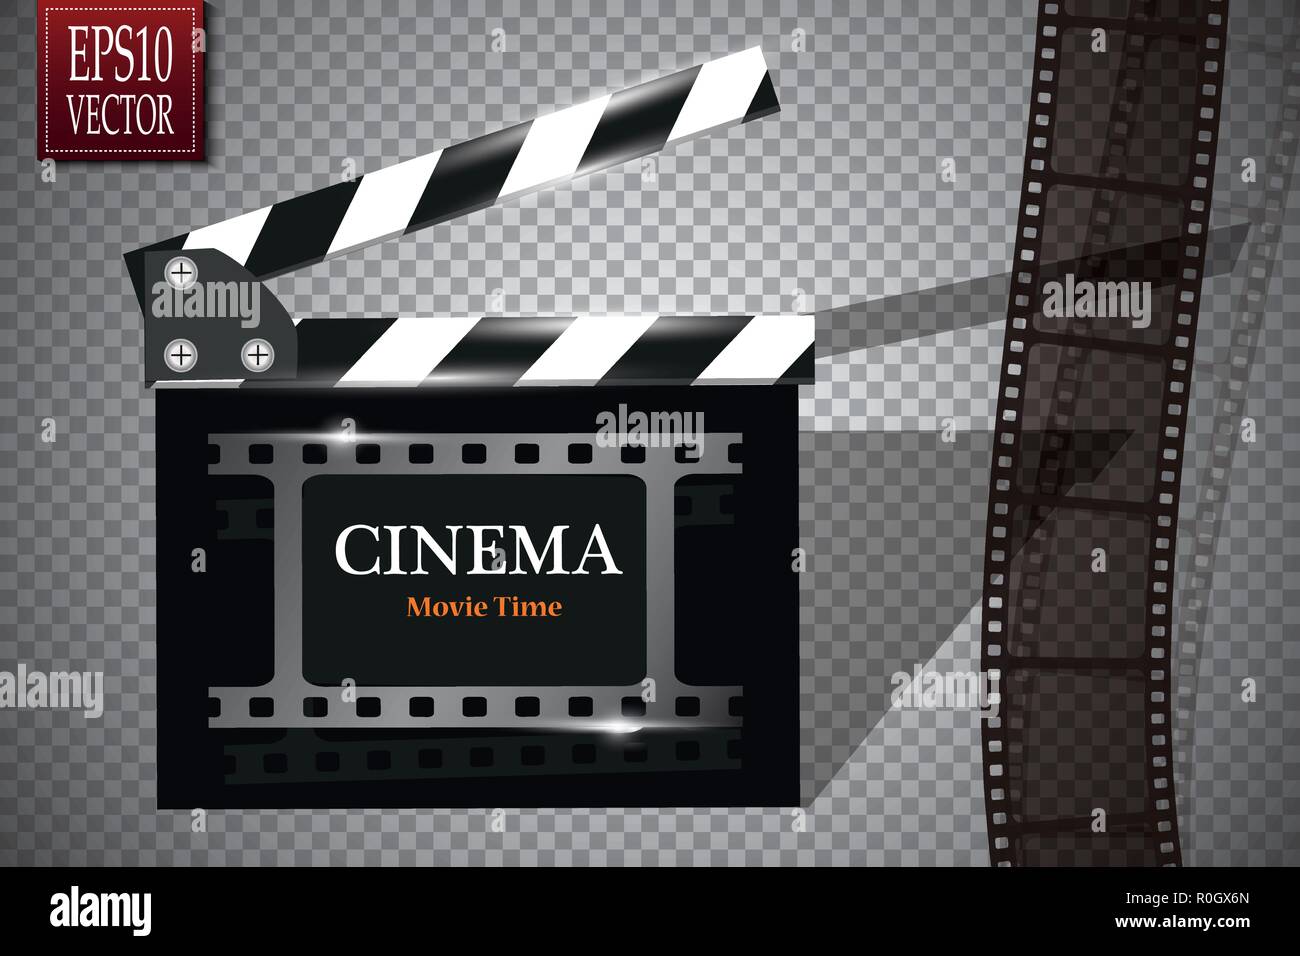 Cinema festival Flyer Or Poster With Movie Reel And Clapper Board. Vector Illustration Of Film Industry. Template For Your Design Stock Vector